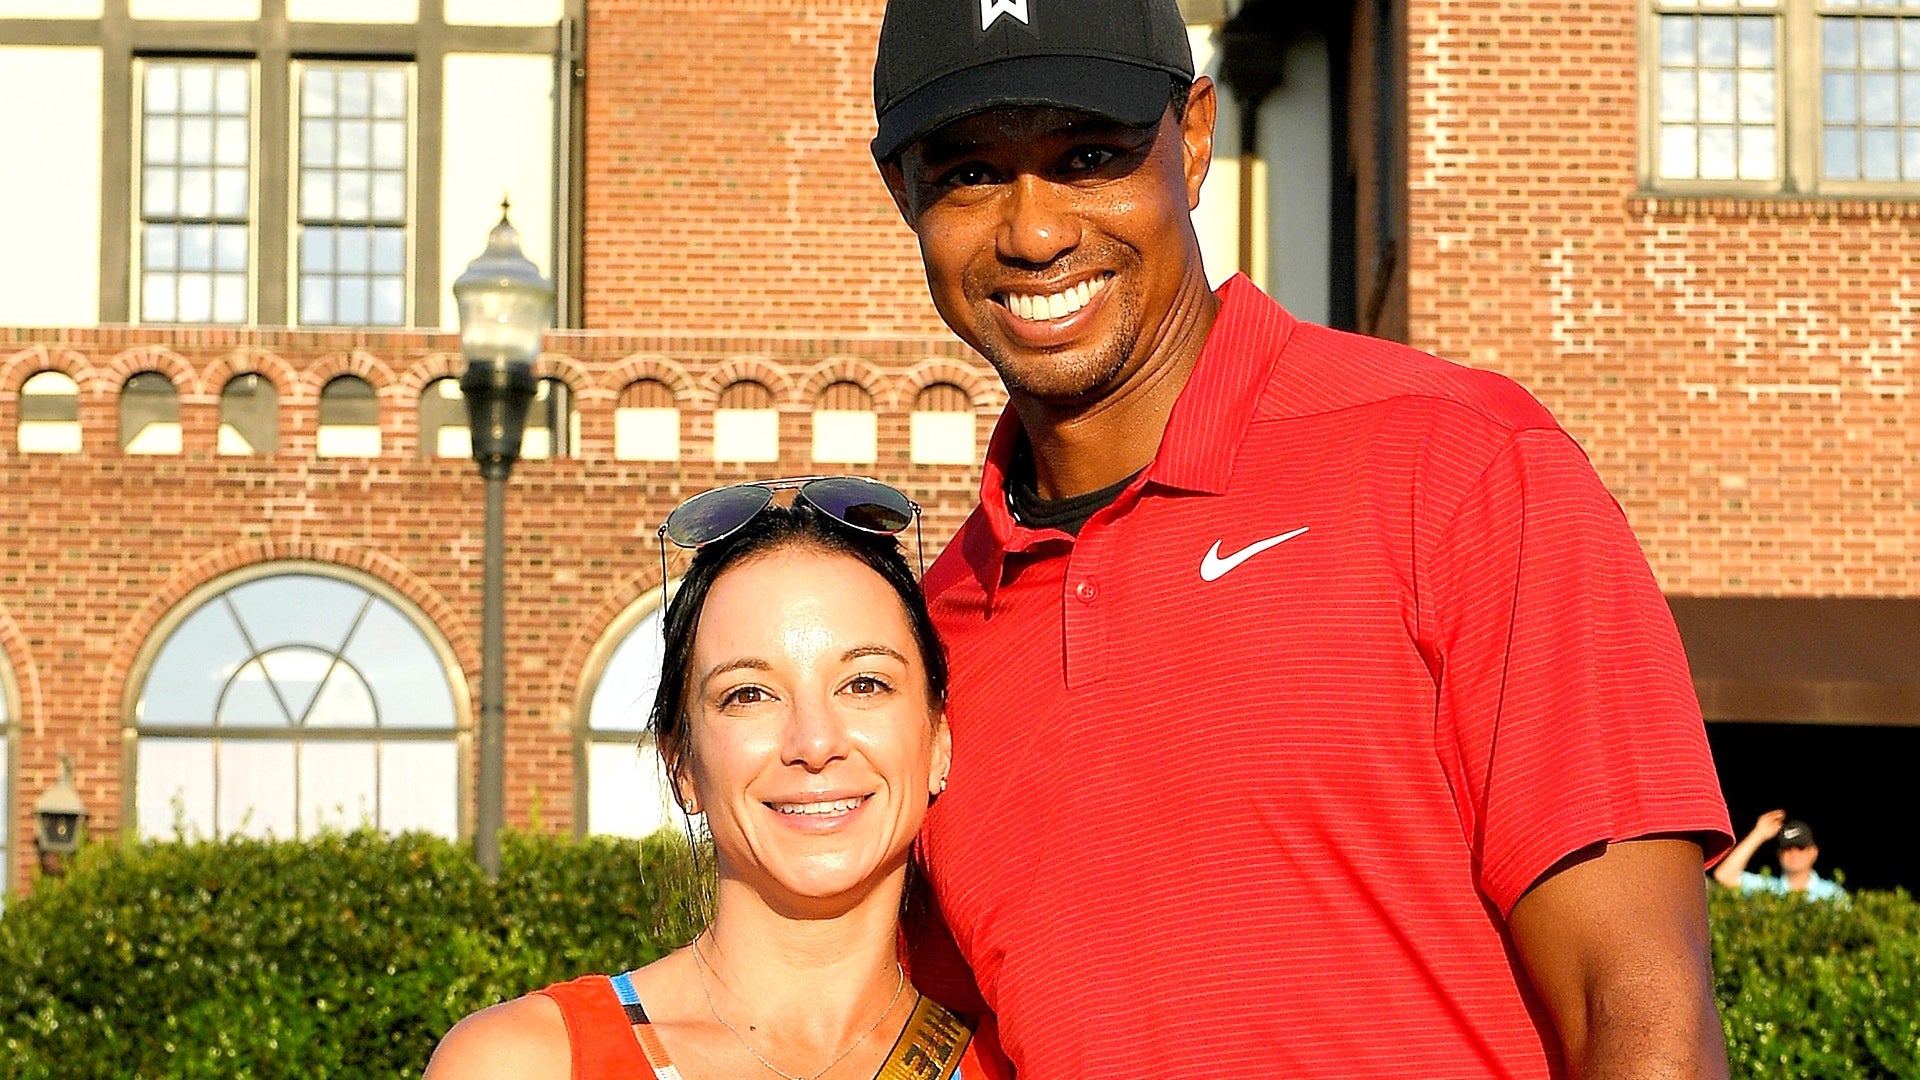 Tiger Woods' Ex Files New Lawsuit to Invalidate Their NDA After Filing Previous $30 Million Lawsuit